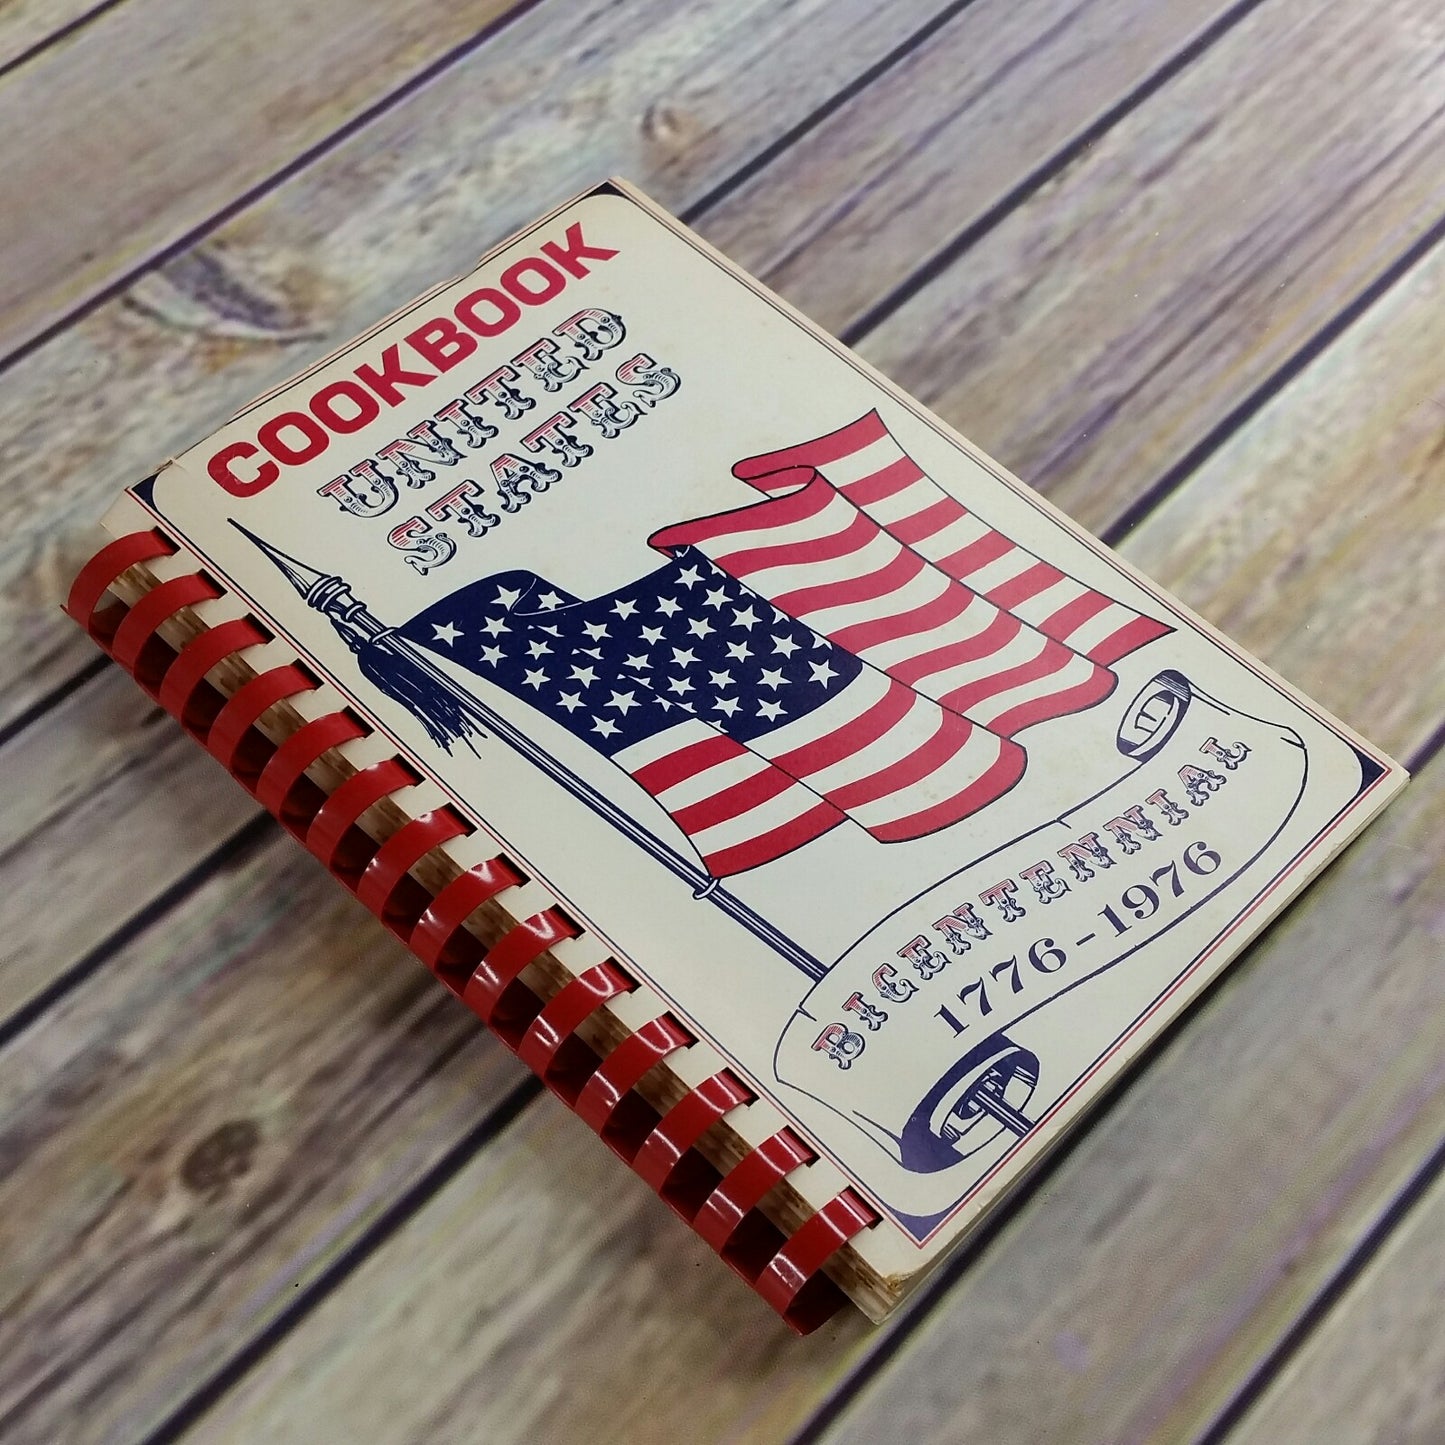 Vintage United States Bicentennial Cookbook Commemorative Historical Independence American Flag Cook Book 1972 - At Grandma's Table